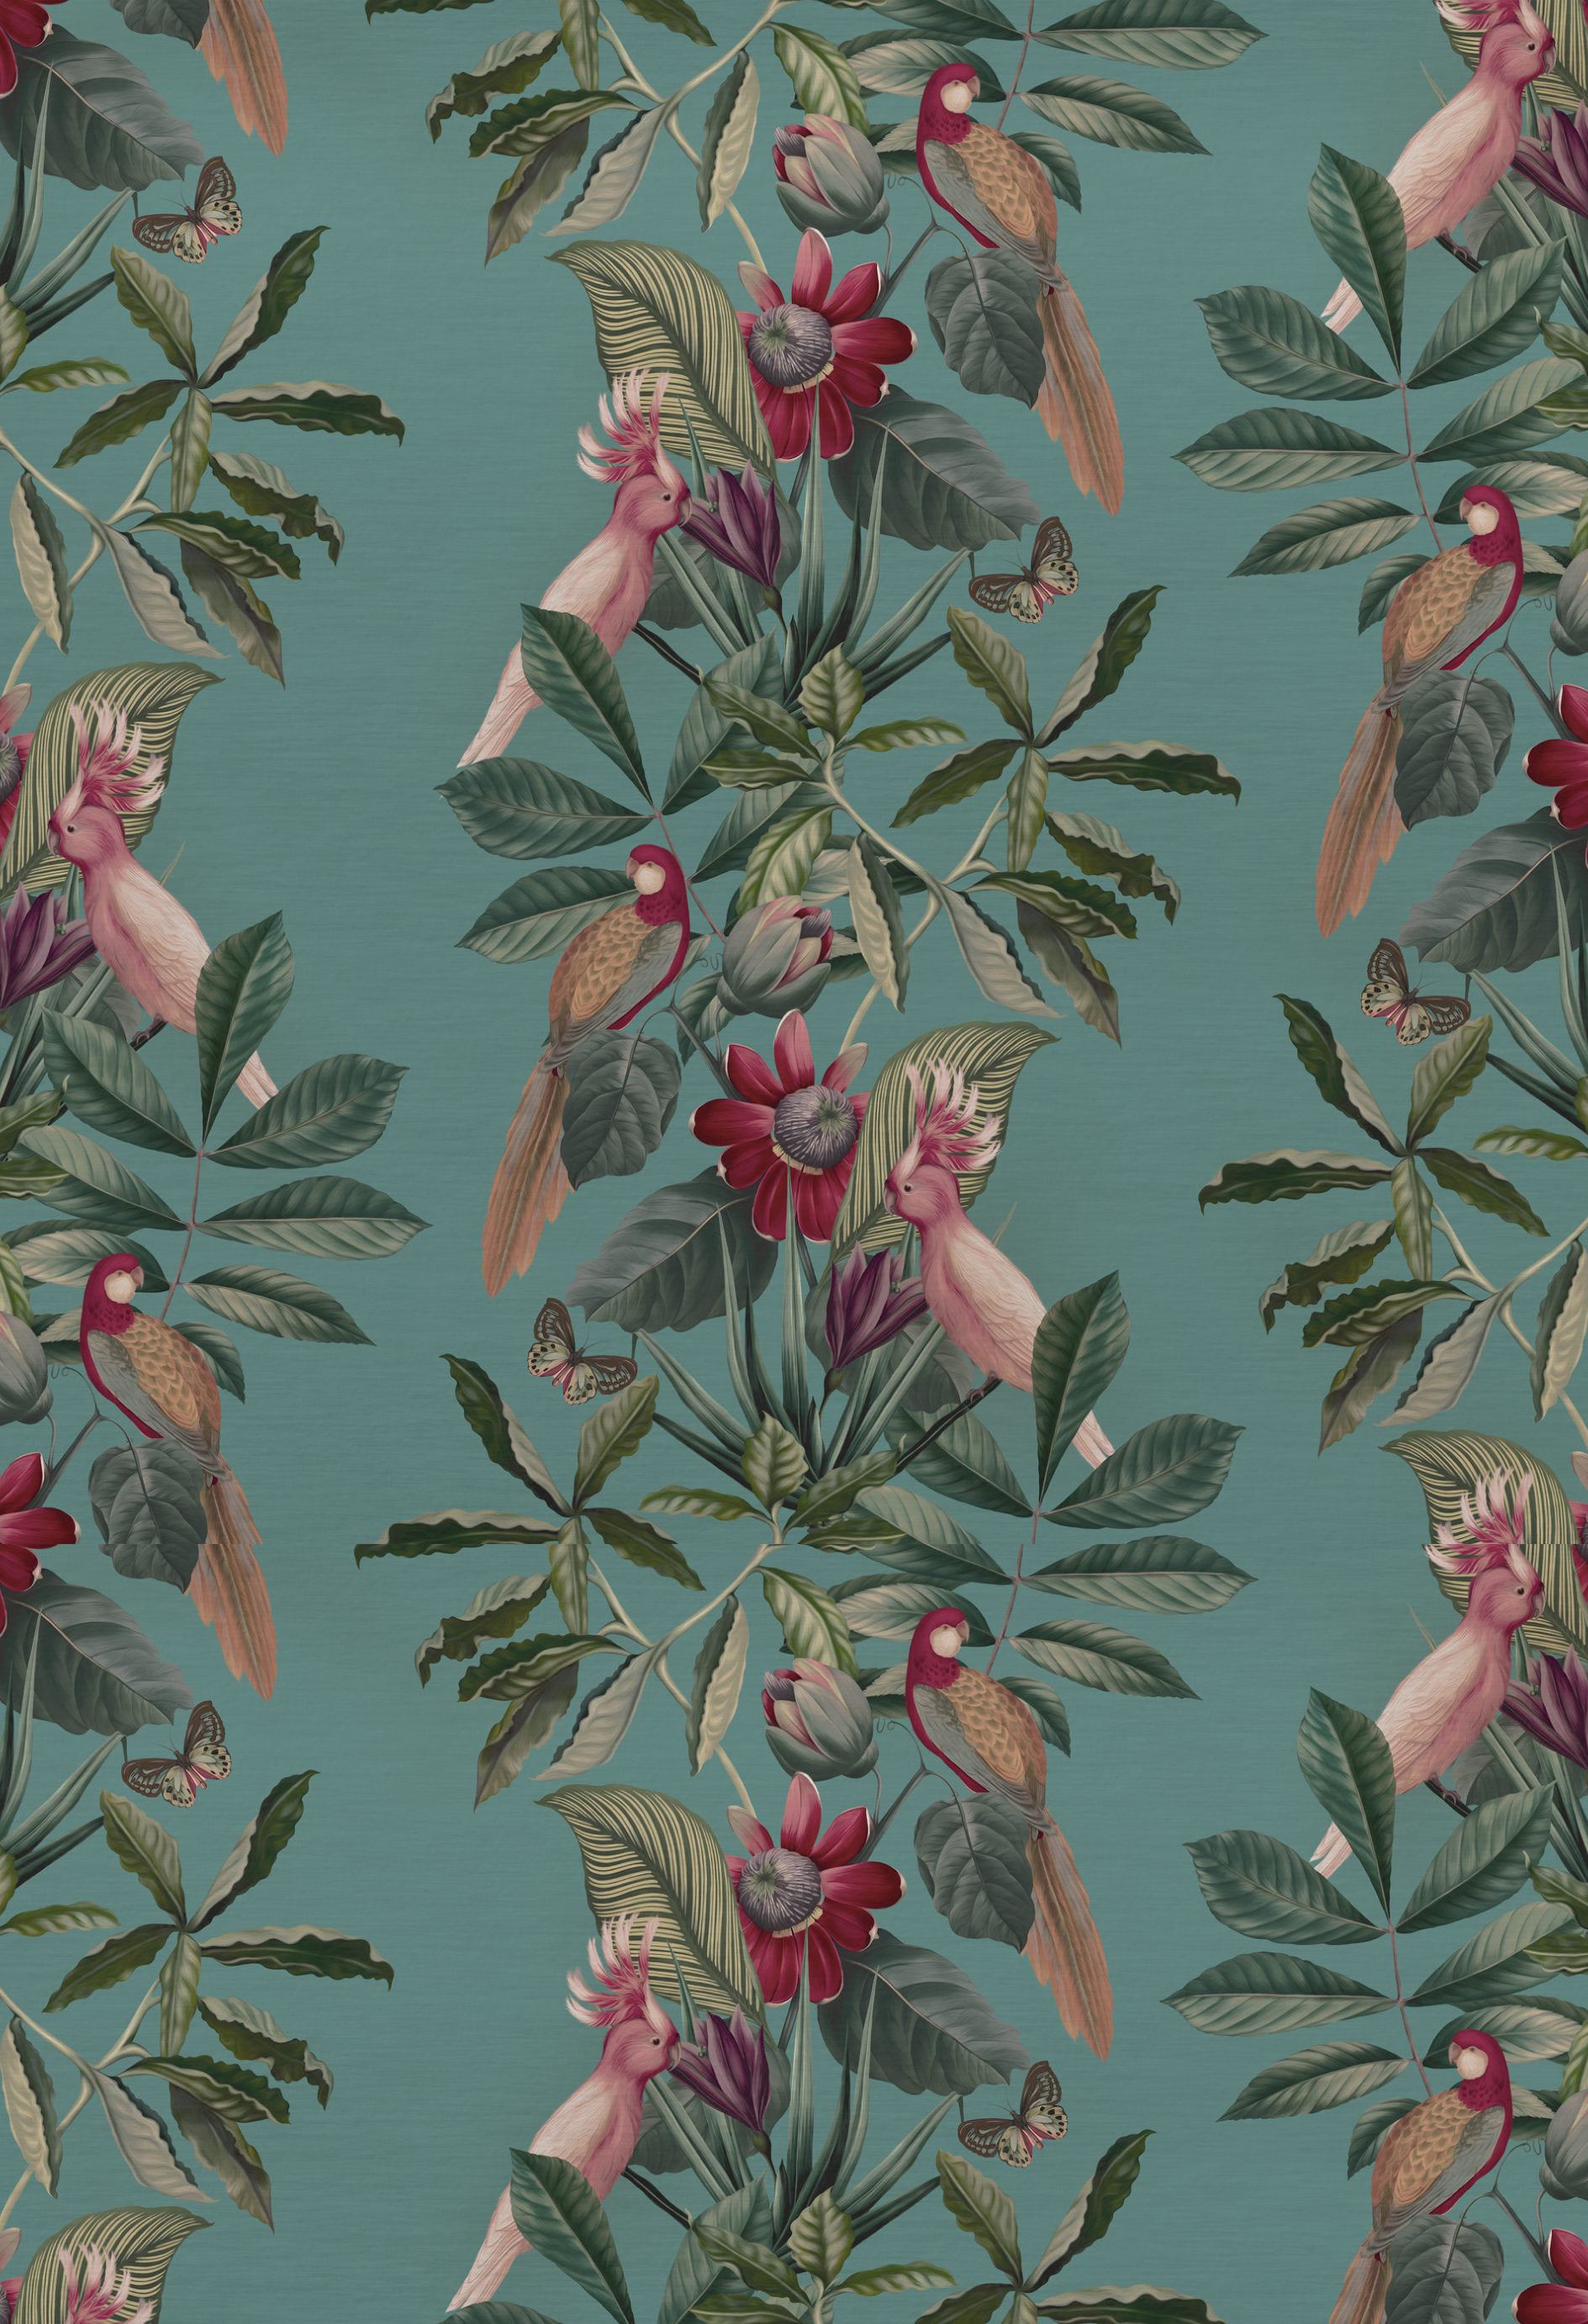 Passiflora Superwide in Vardo Wallpaper of a tropical pattern of birds, flowers and leaves on teal background by Deus Ex Gardenia.